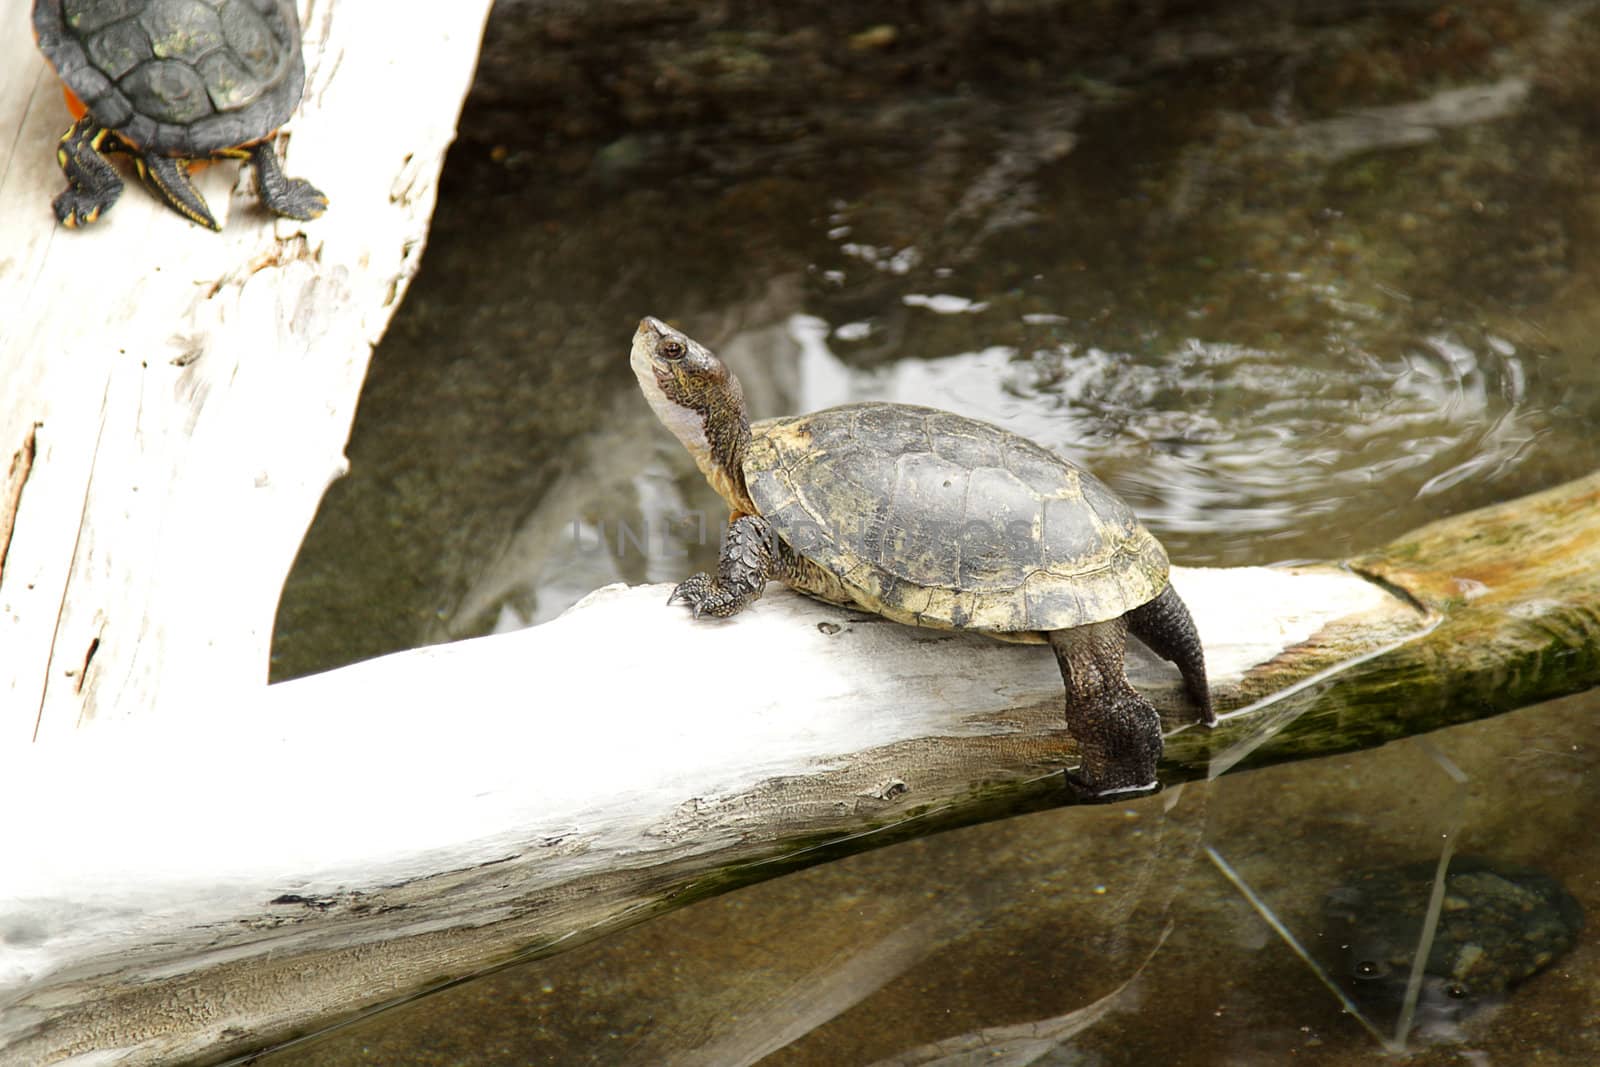 Turtles in the zoo by pulen